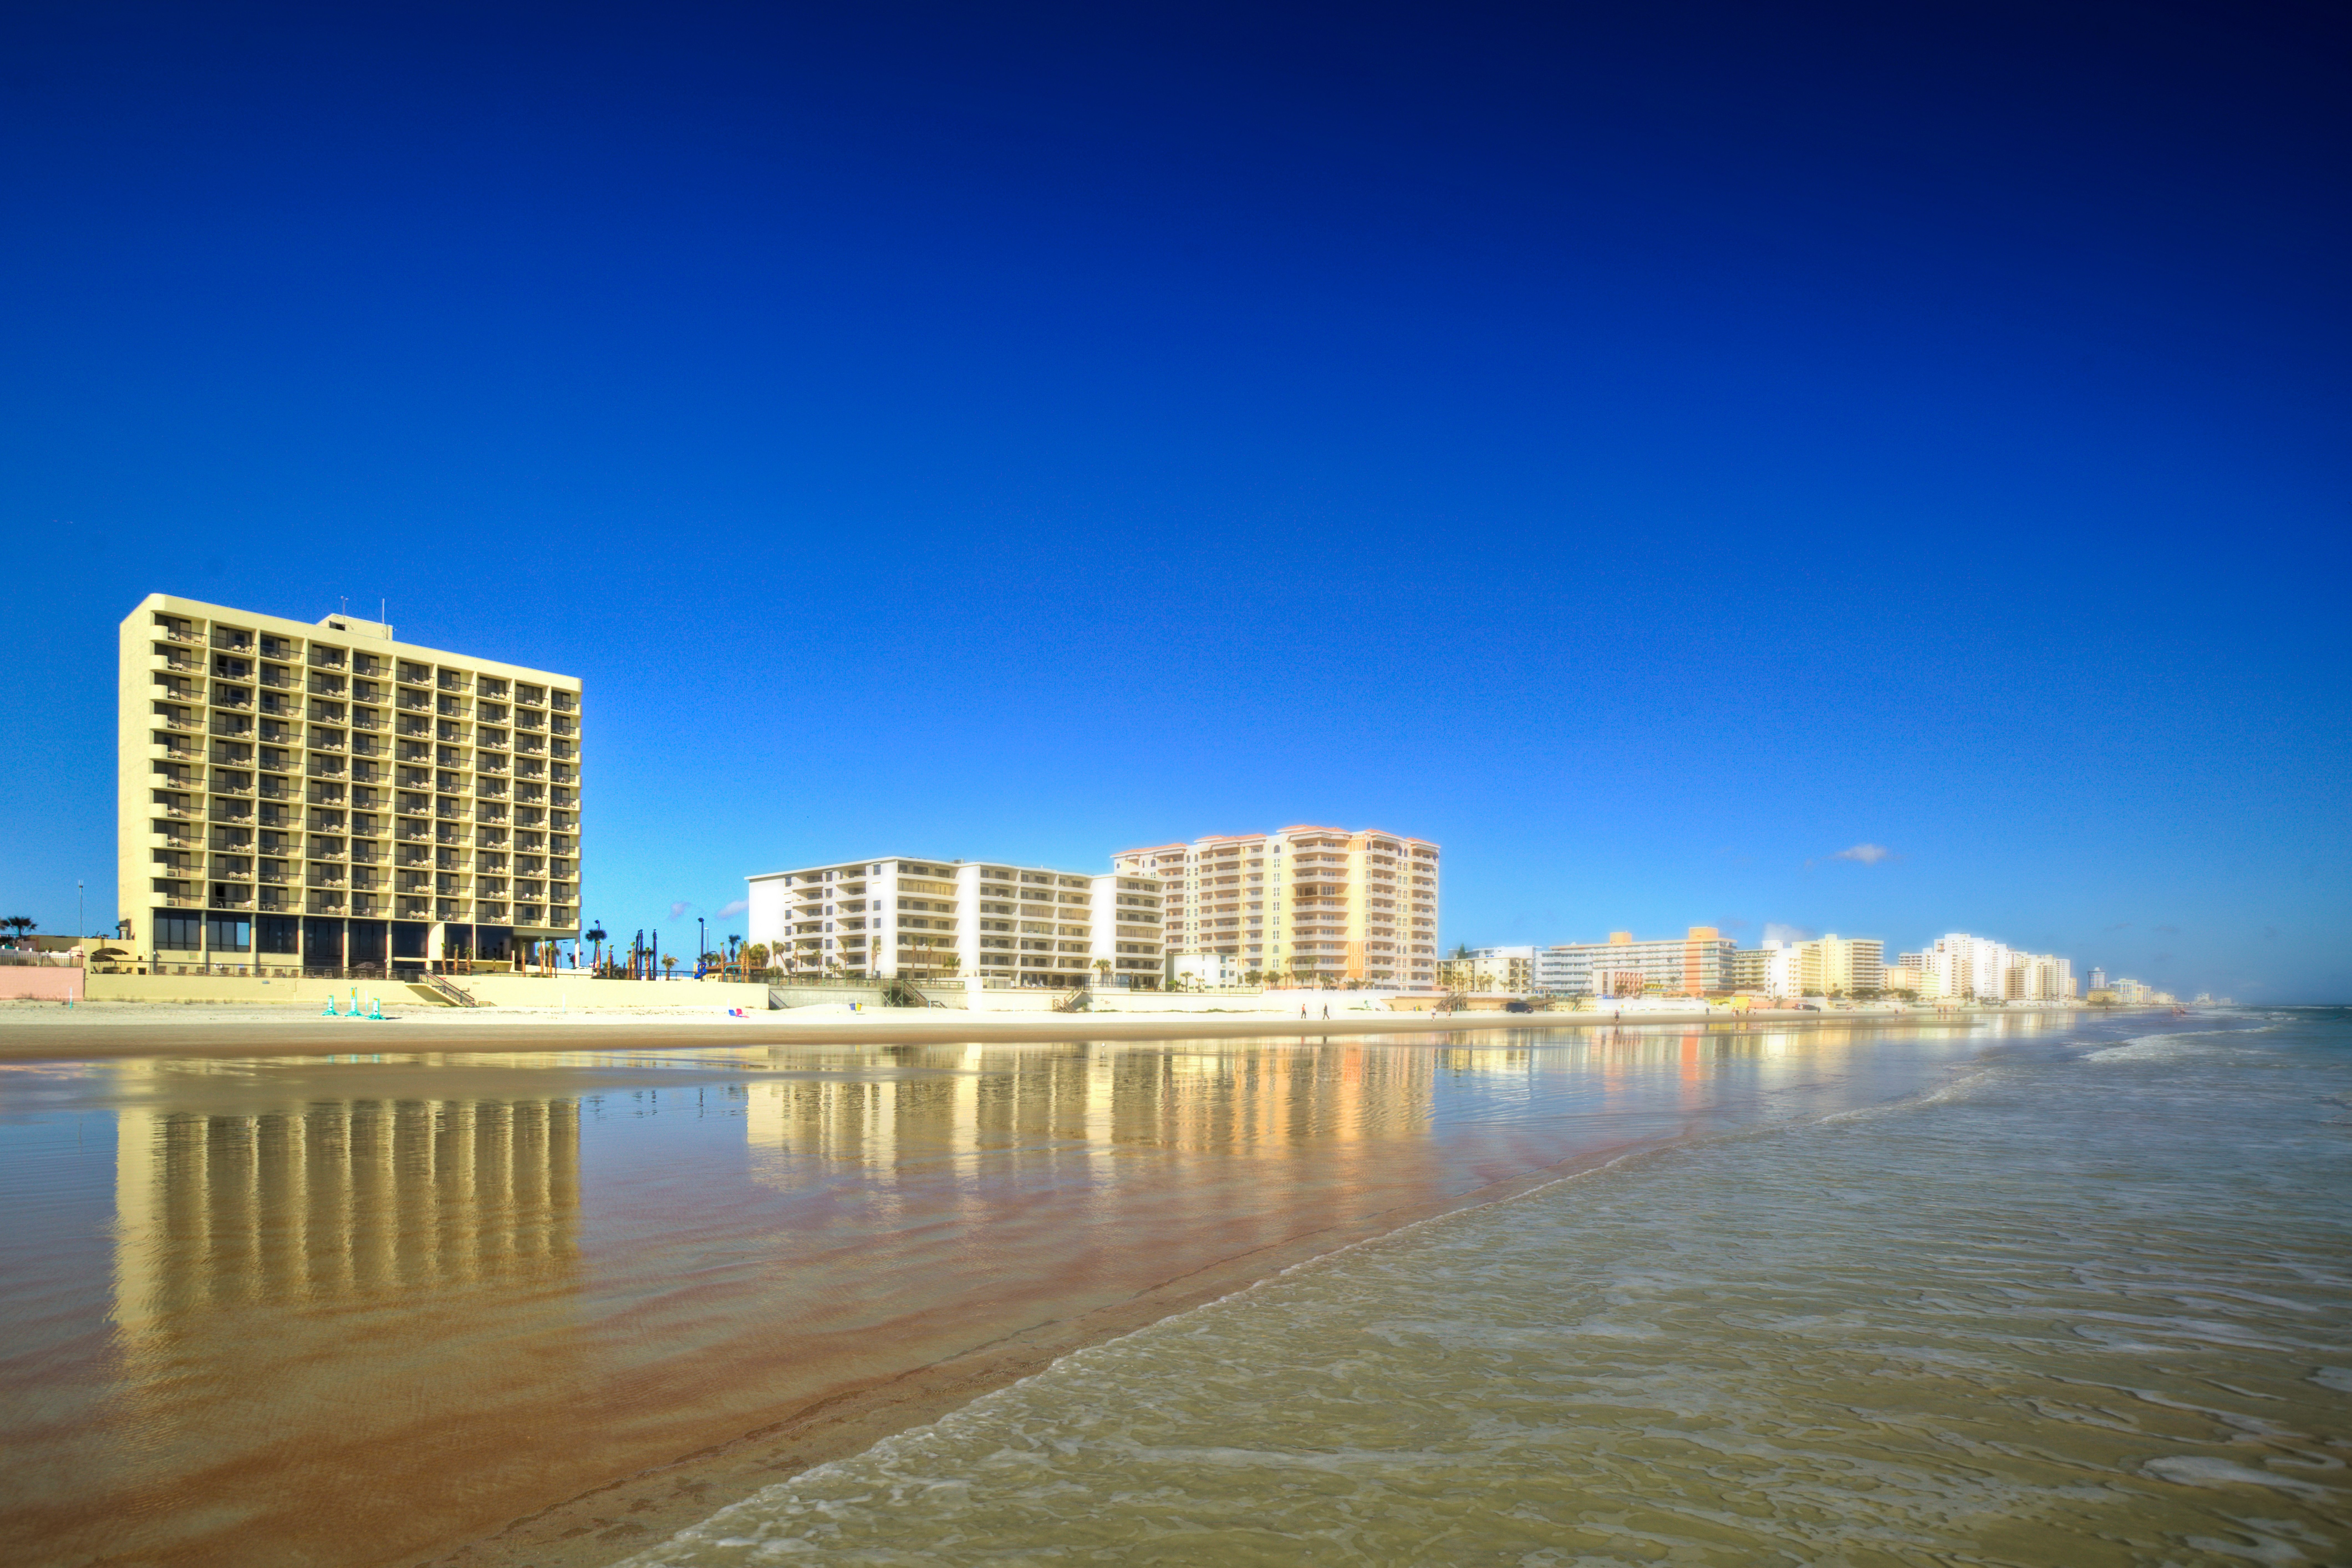 You will love our oceanfront hotel in Daytona Beach